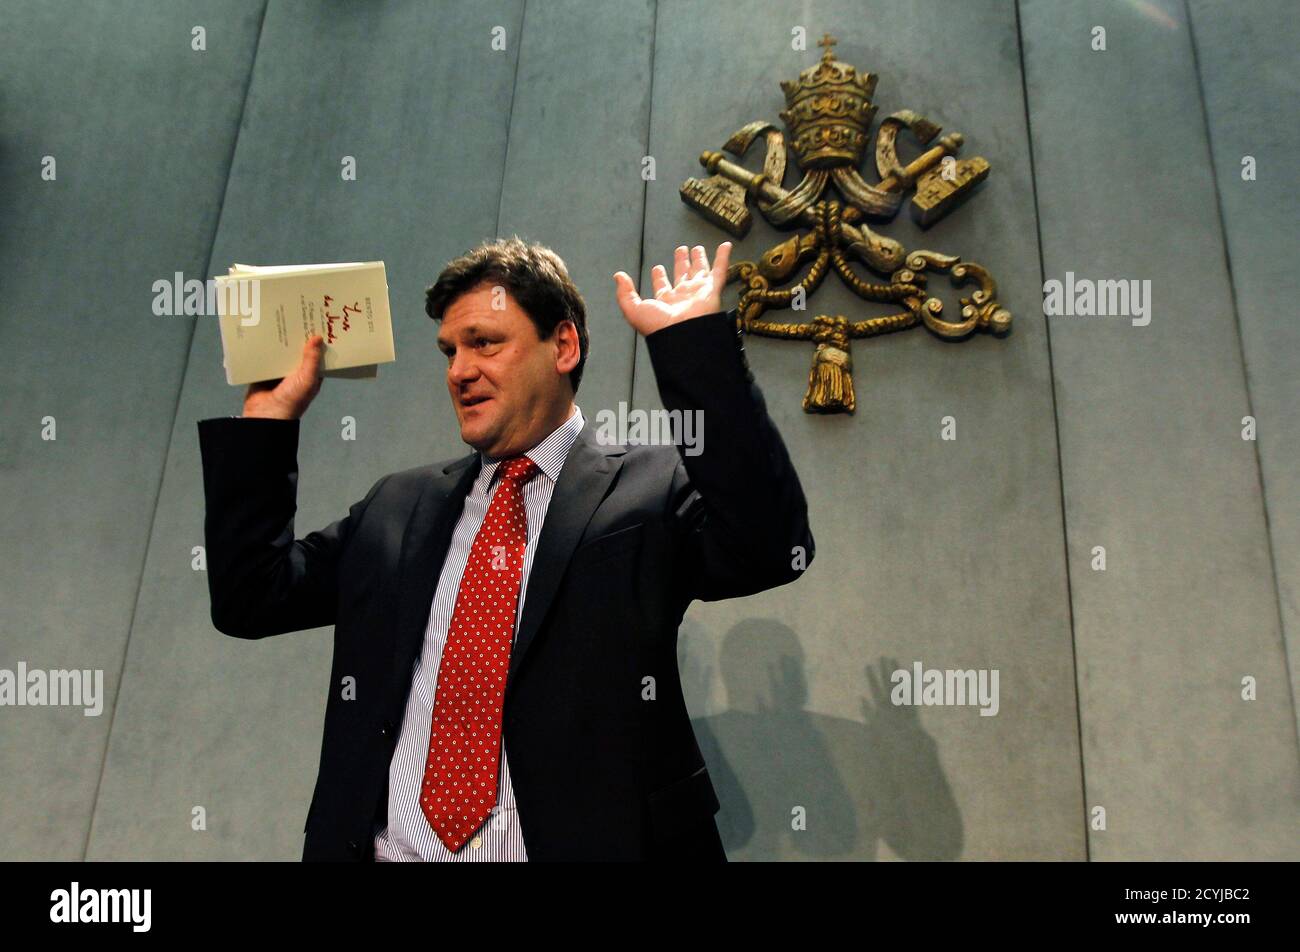 German Catholic journalist Peter Seewald reacts as he holds his new book about Pope Benedict XVI while leaving at the end of a news conference at the Vatican November 23, 2010. Pope Benedict says in the new book, called 'Light of the World: The Pope, the Church, and the Sign of the Times', that he would not hesitate to become the first pontiff to resign willingly in more than 700 years if he felt himself no longer able, 'physically, psychologically and spiritually', to lead the church. The book, an interview with German Catholic journalist Peter Seewald, has so far made headlines for the pope' Stock Photo